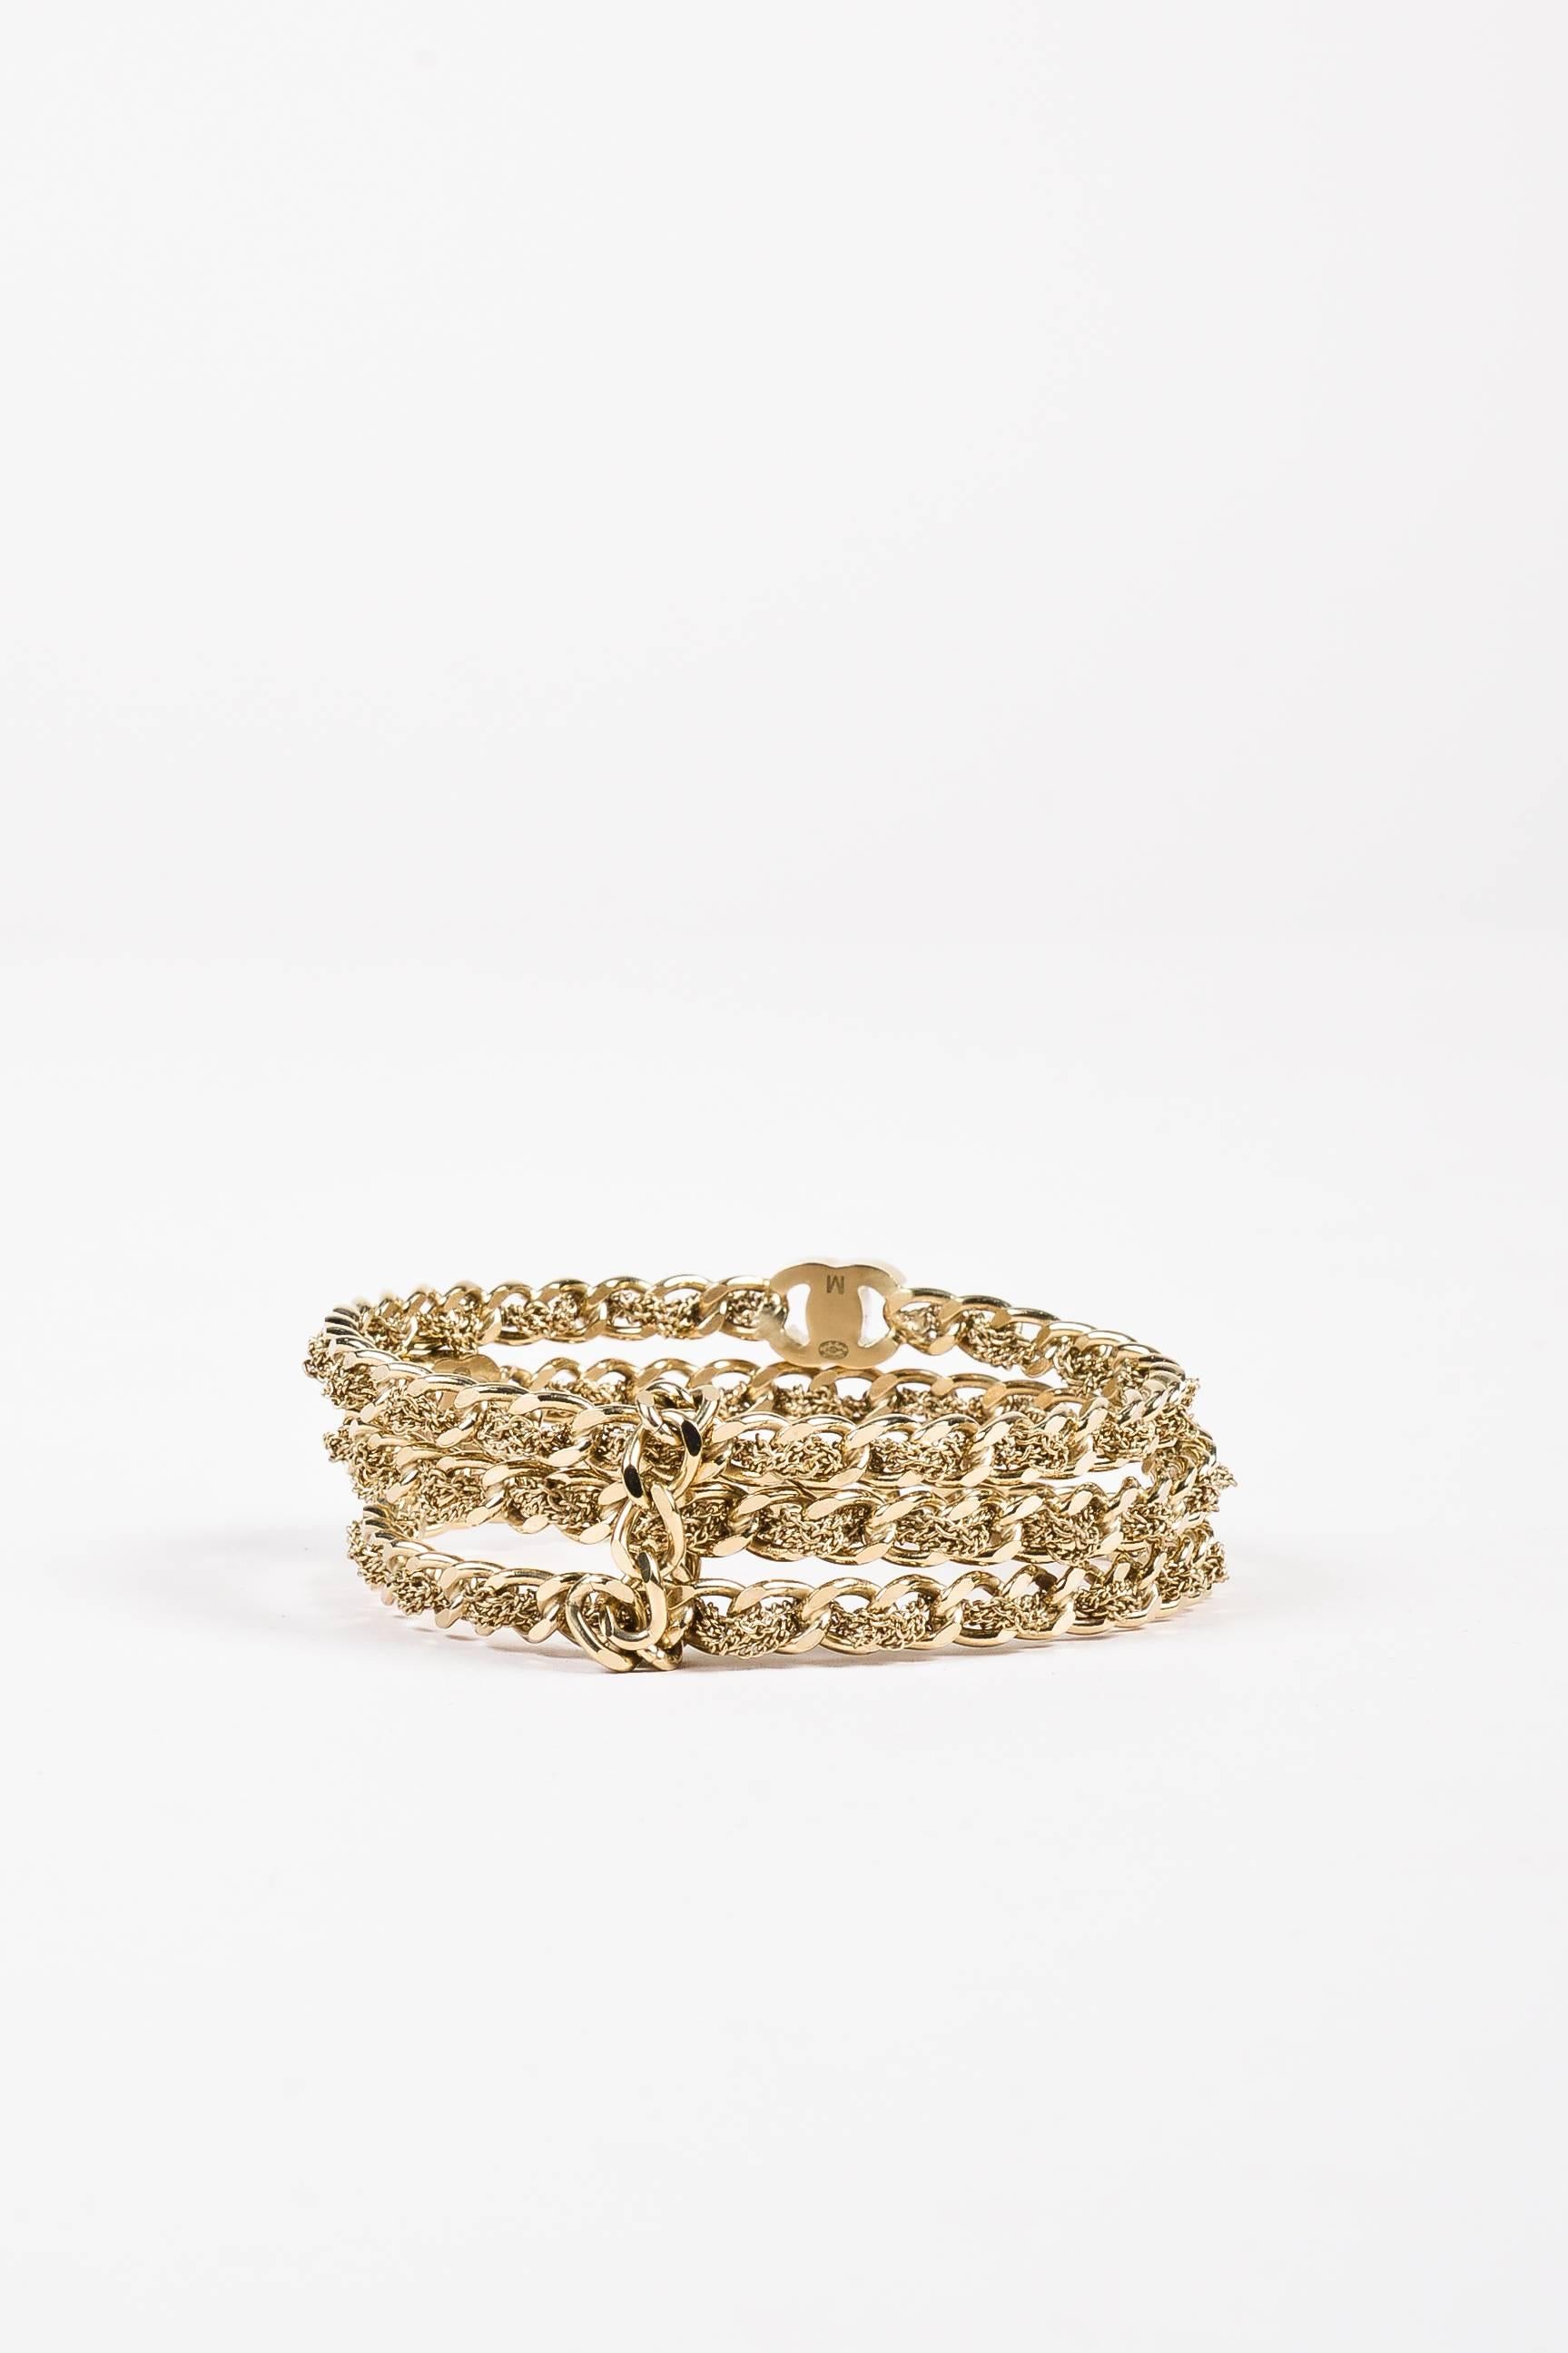 Chanel 2012 Collection Gold Tone 'CC' Logo Chain Bangle Bracelet Set Size M In Excellent Condition For Sale In Chicago, IL